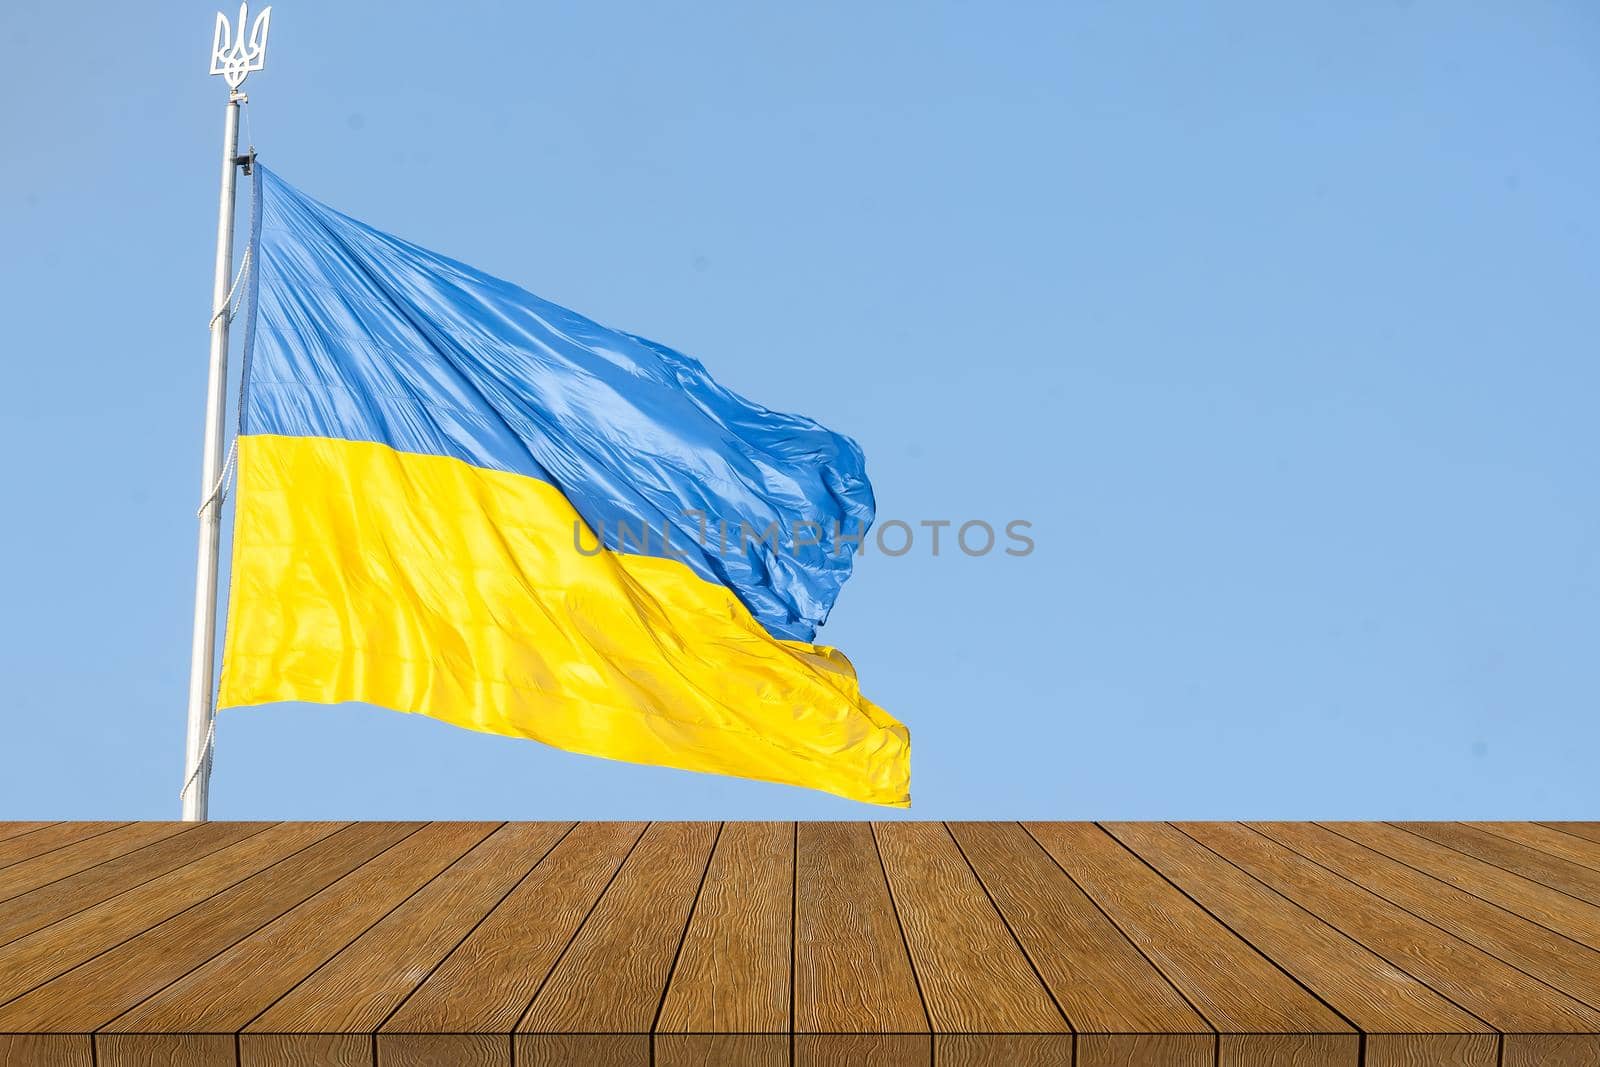 Ukraine flag on backgrounds textures tabletop, wooden board. by Andelov13